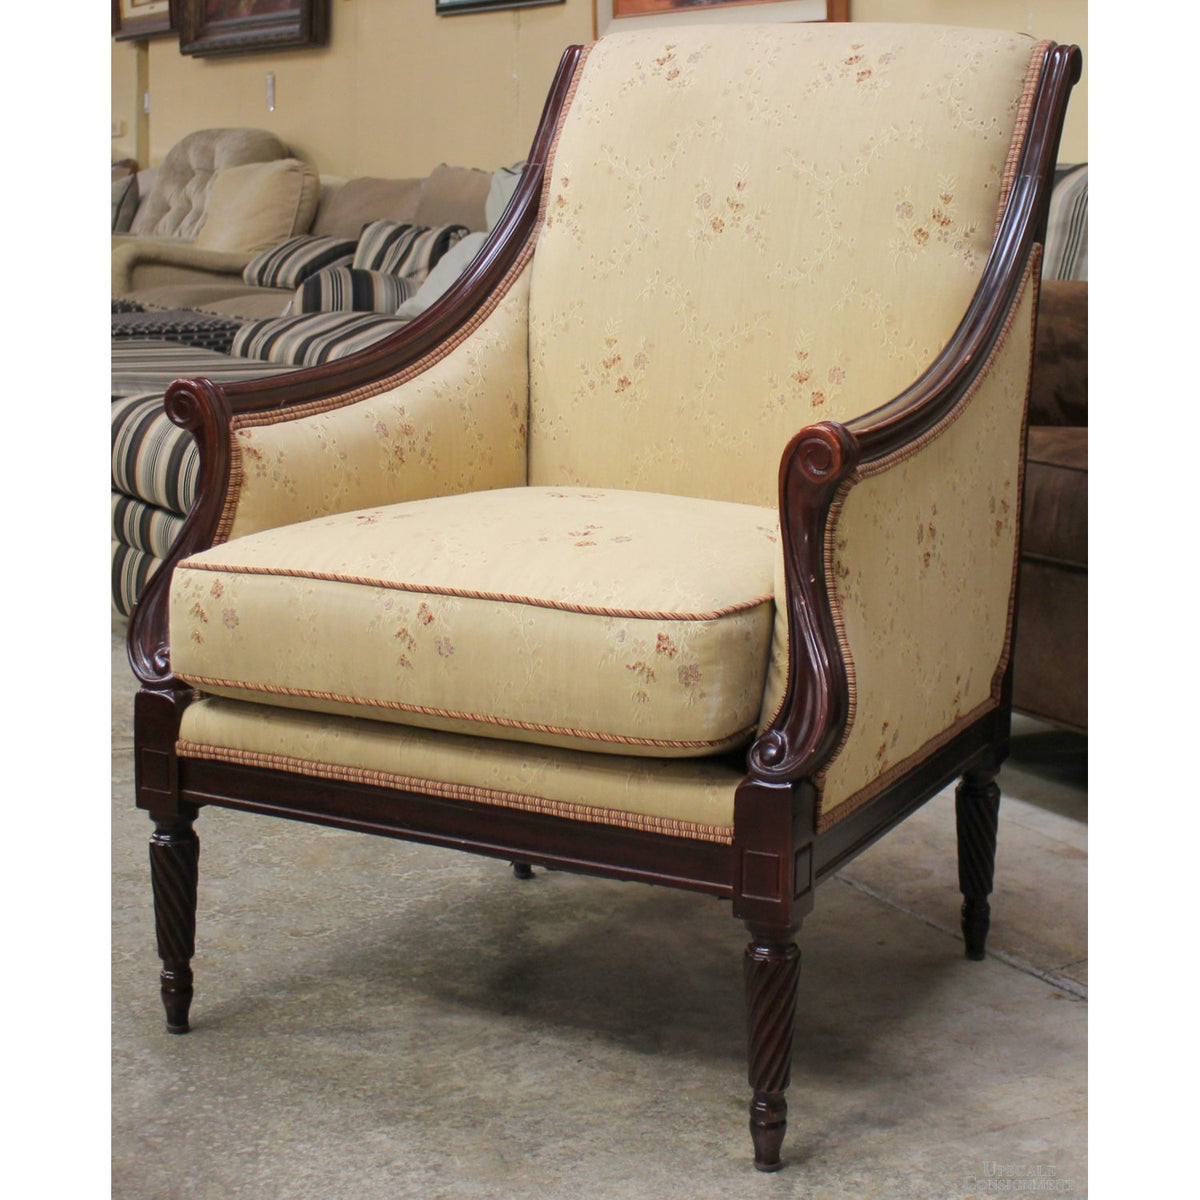 Calico Corners Floral Accent Chair